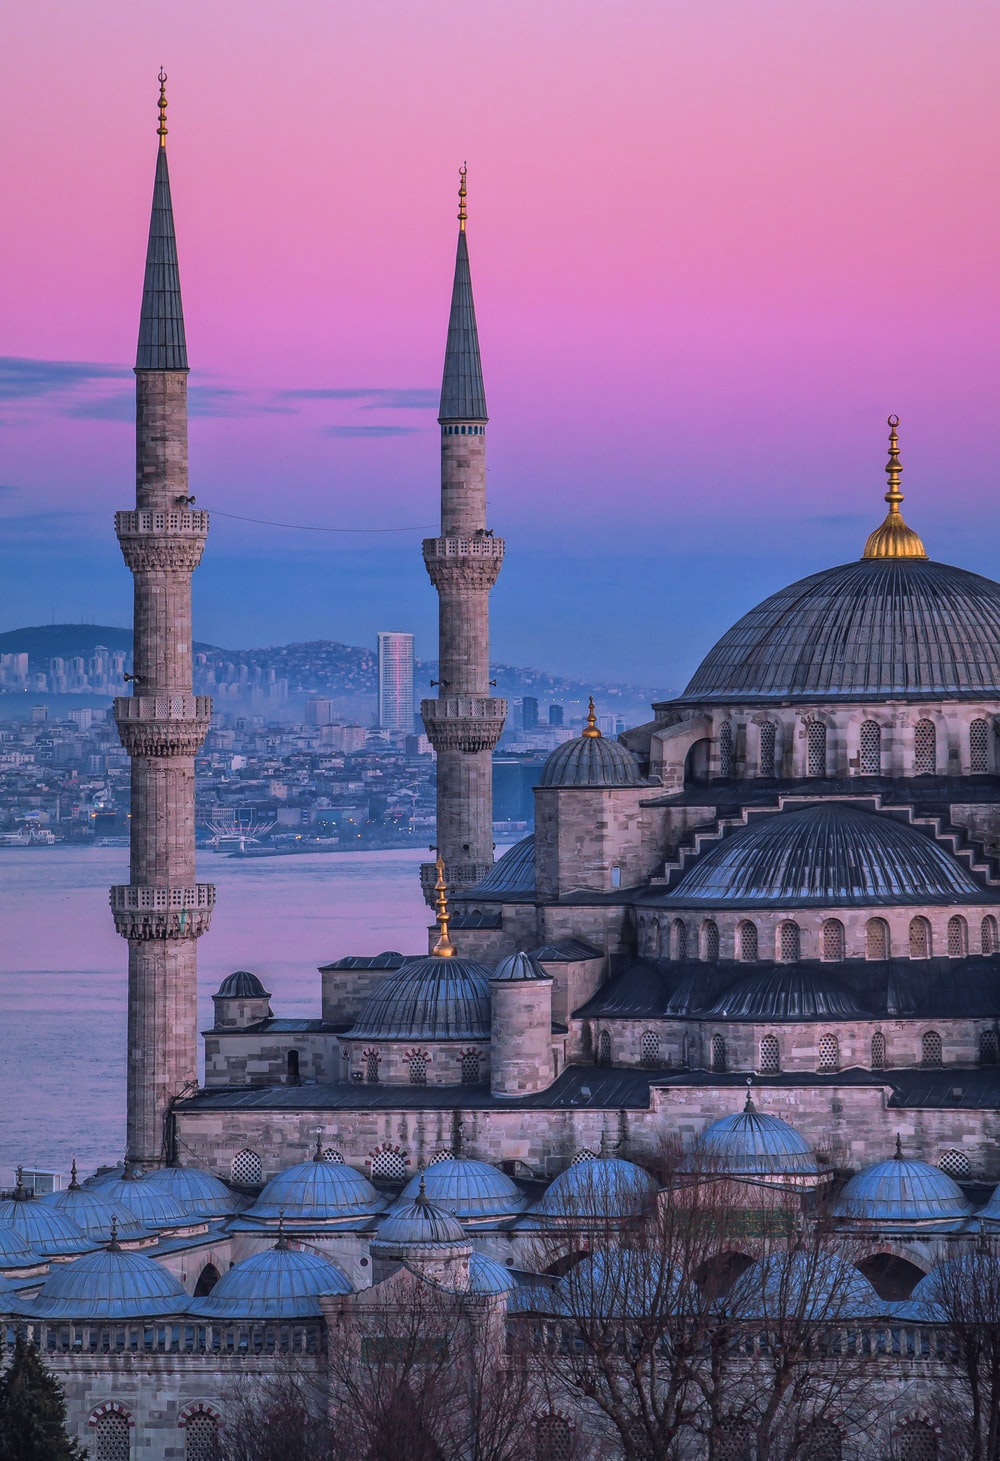 Istanbul Mosque Picture. Download Free Image